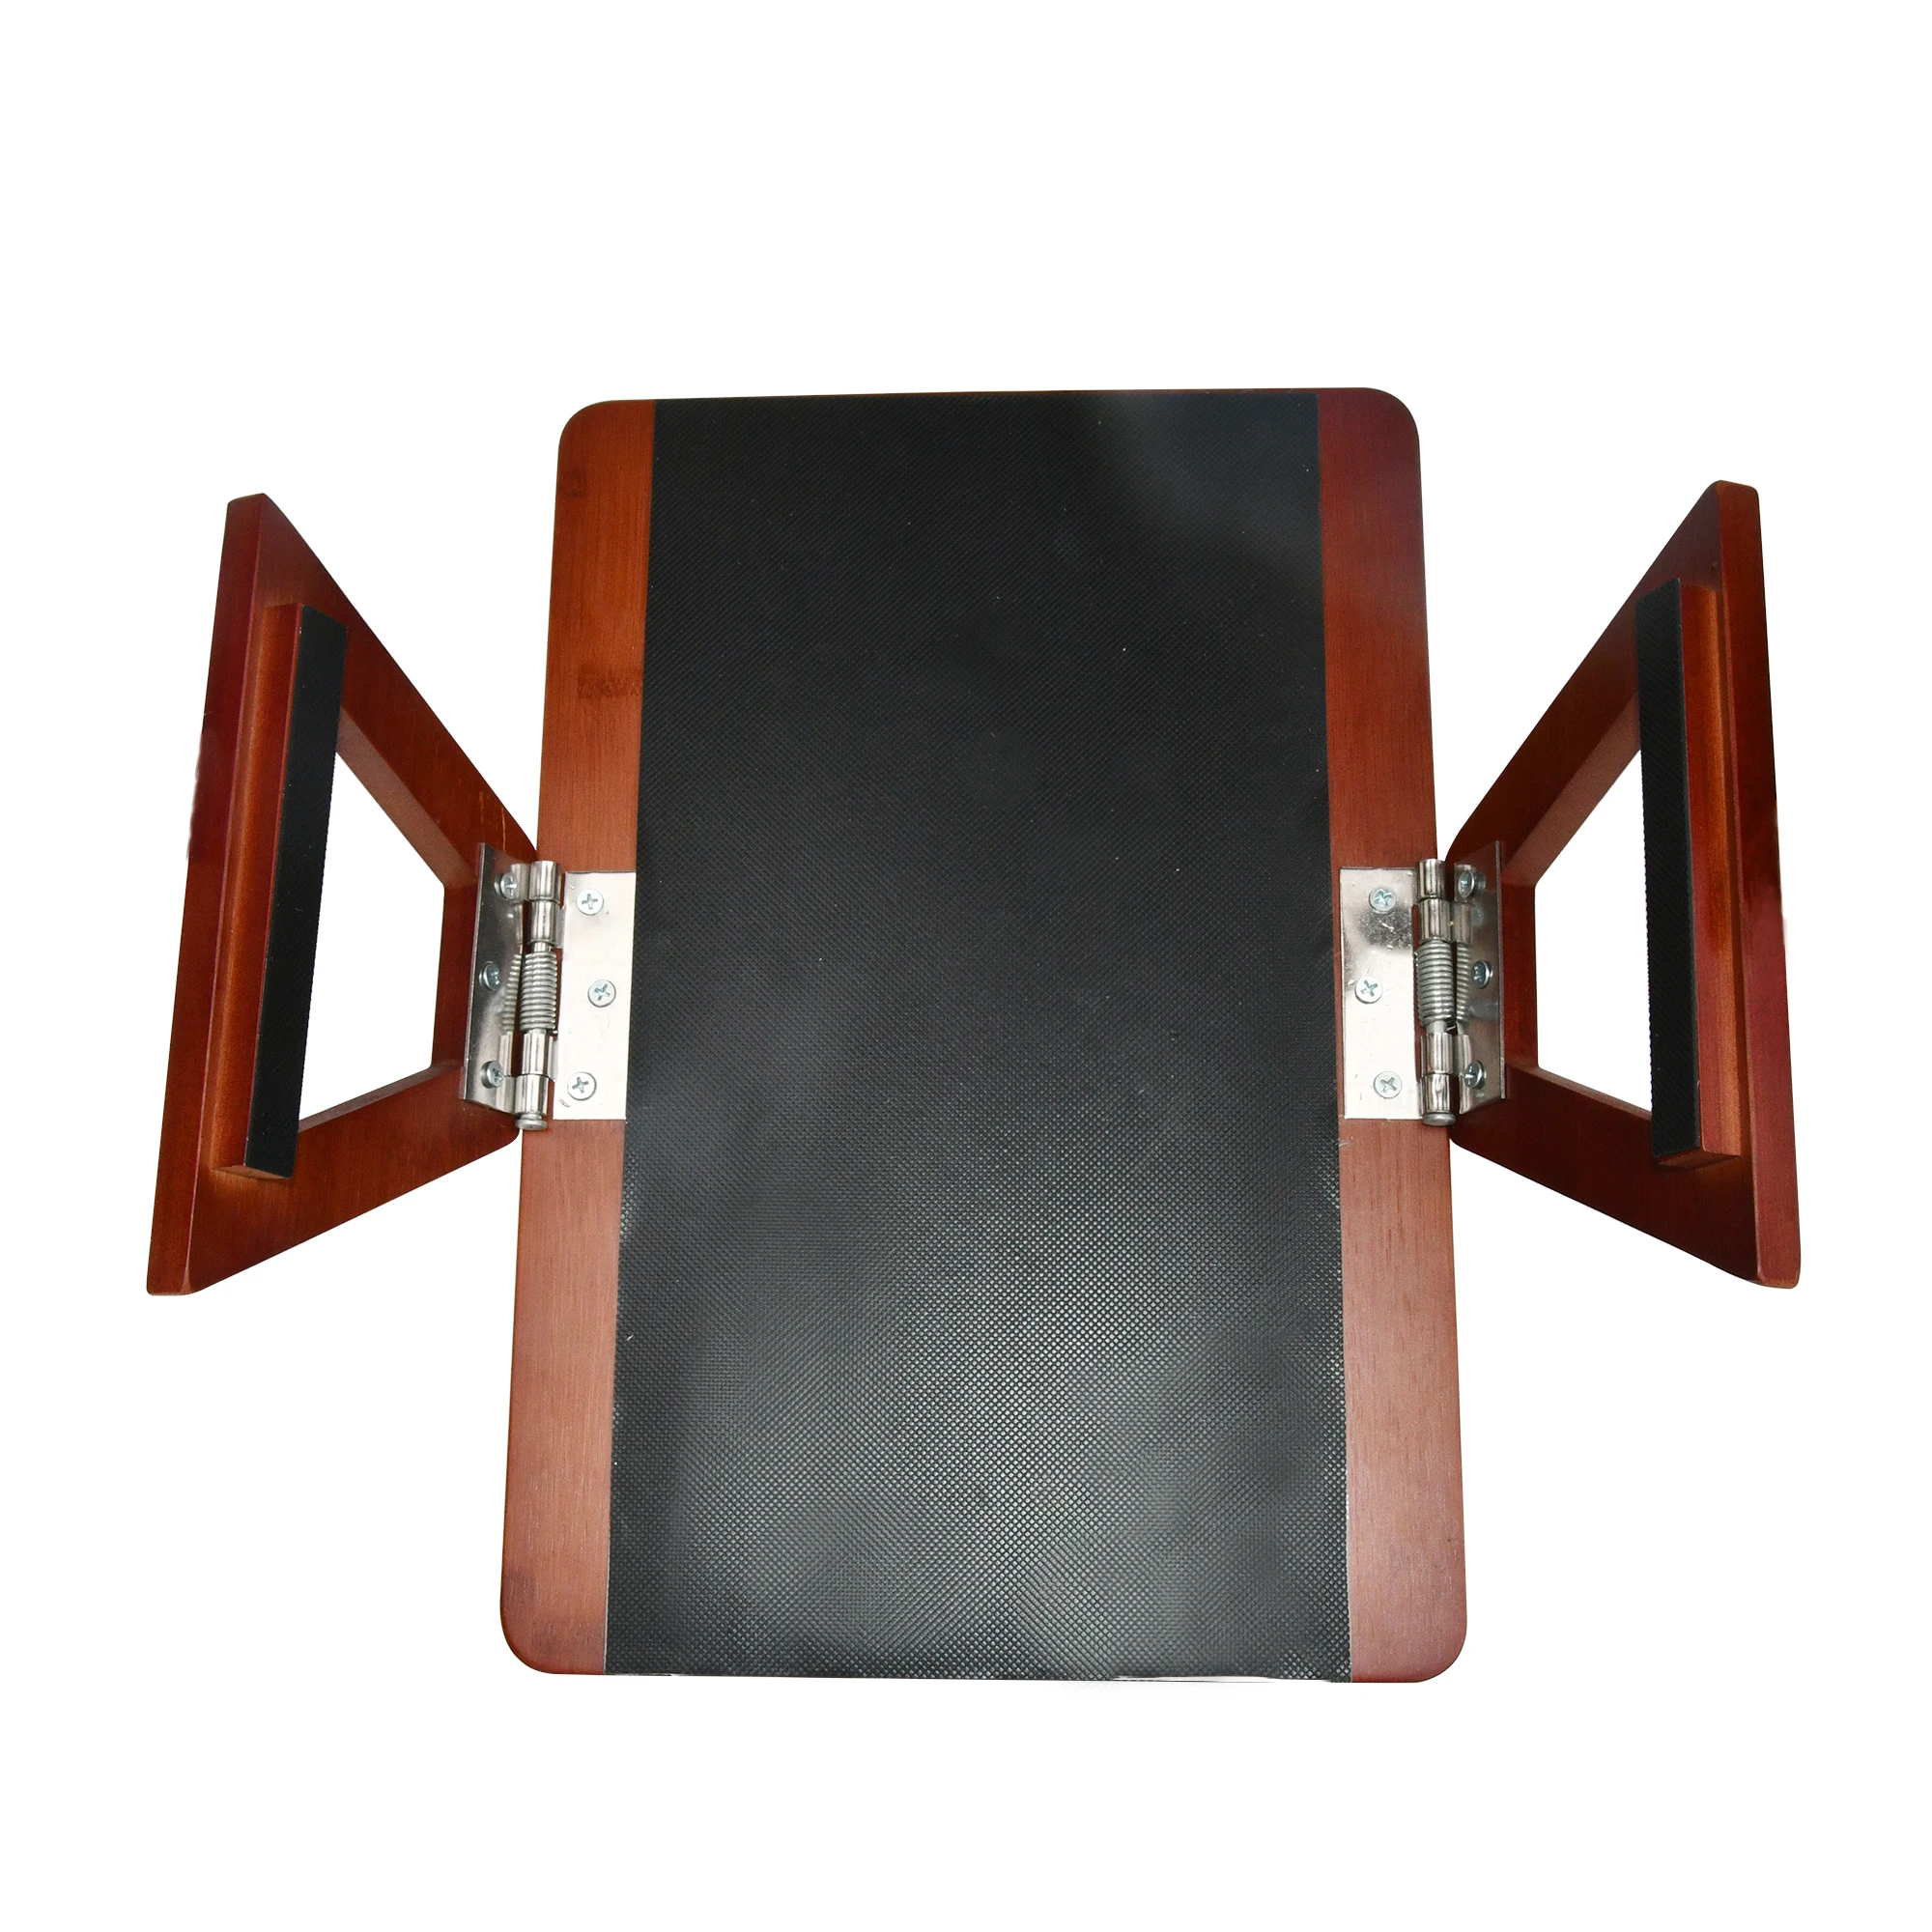 New Table Mate Foldable TV Sofa,Portable Laptop Notebook Table Foldable Stand Sofa,Cuddle Couch Swivel Tray Table Cup Holder